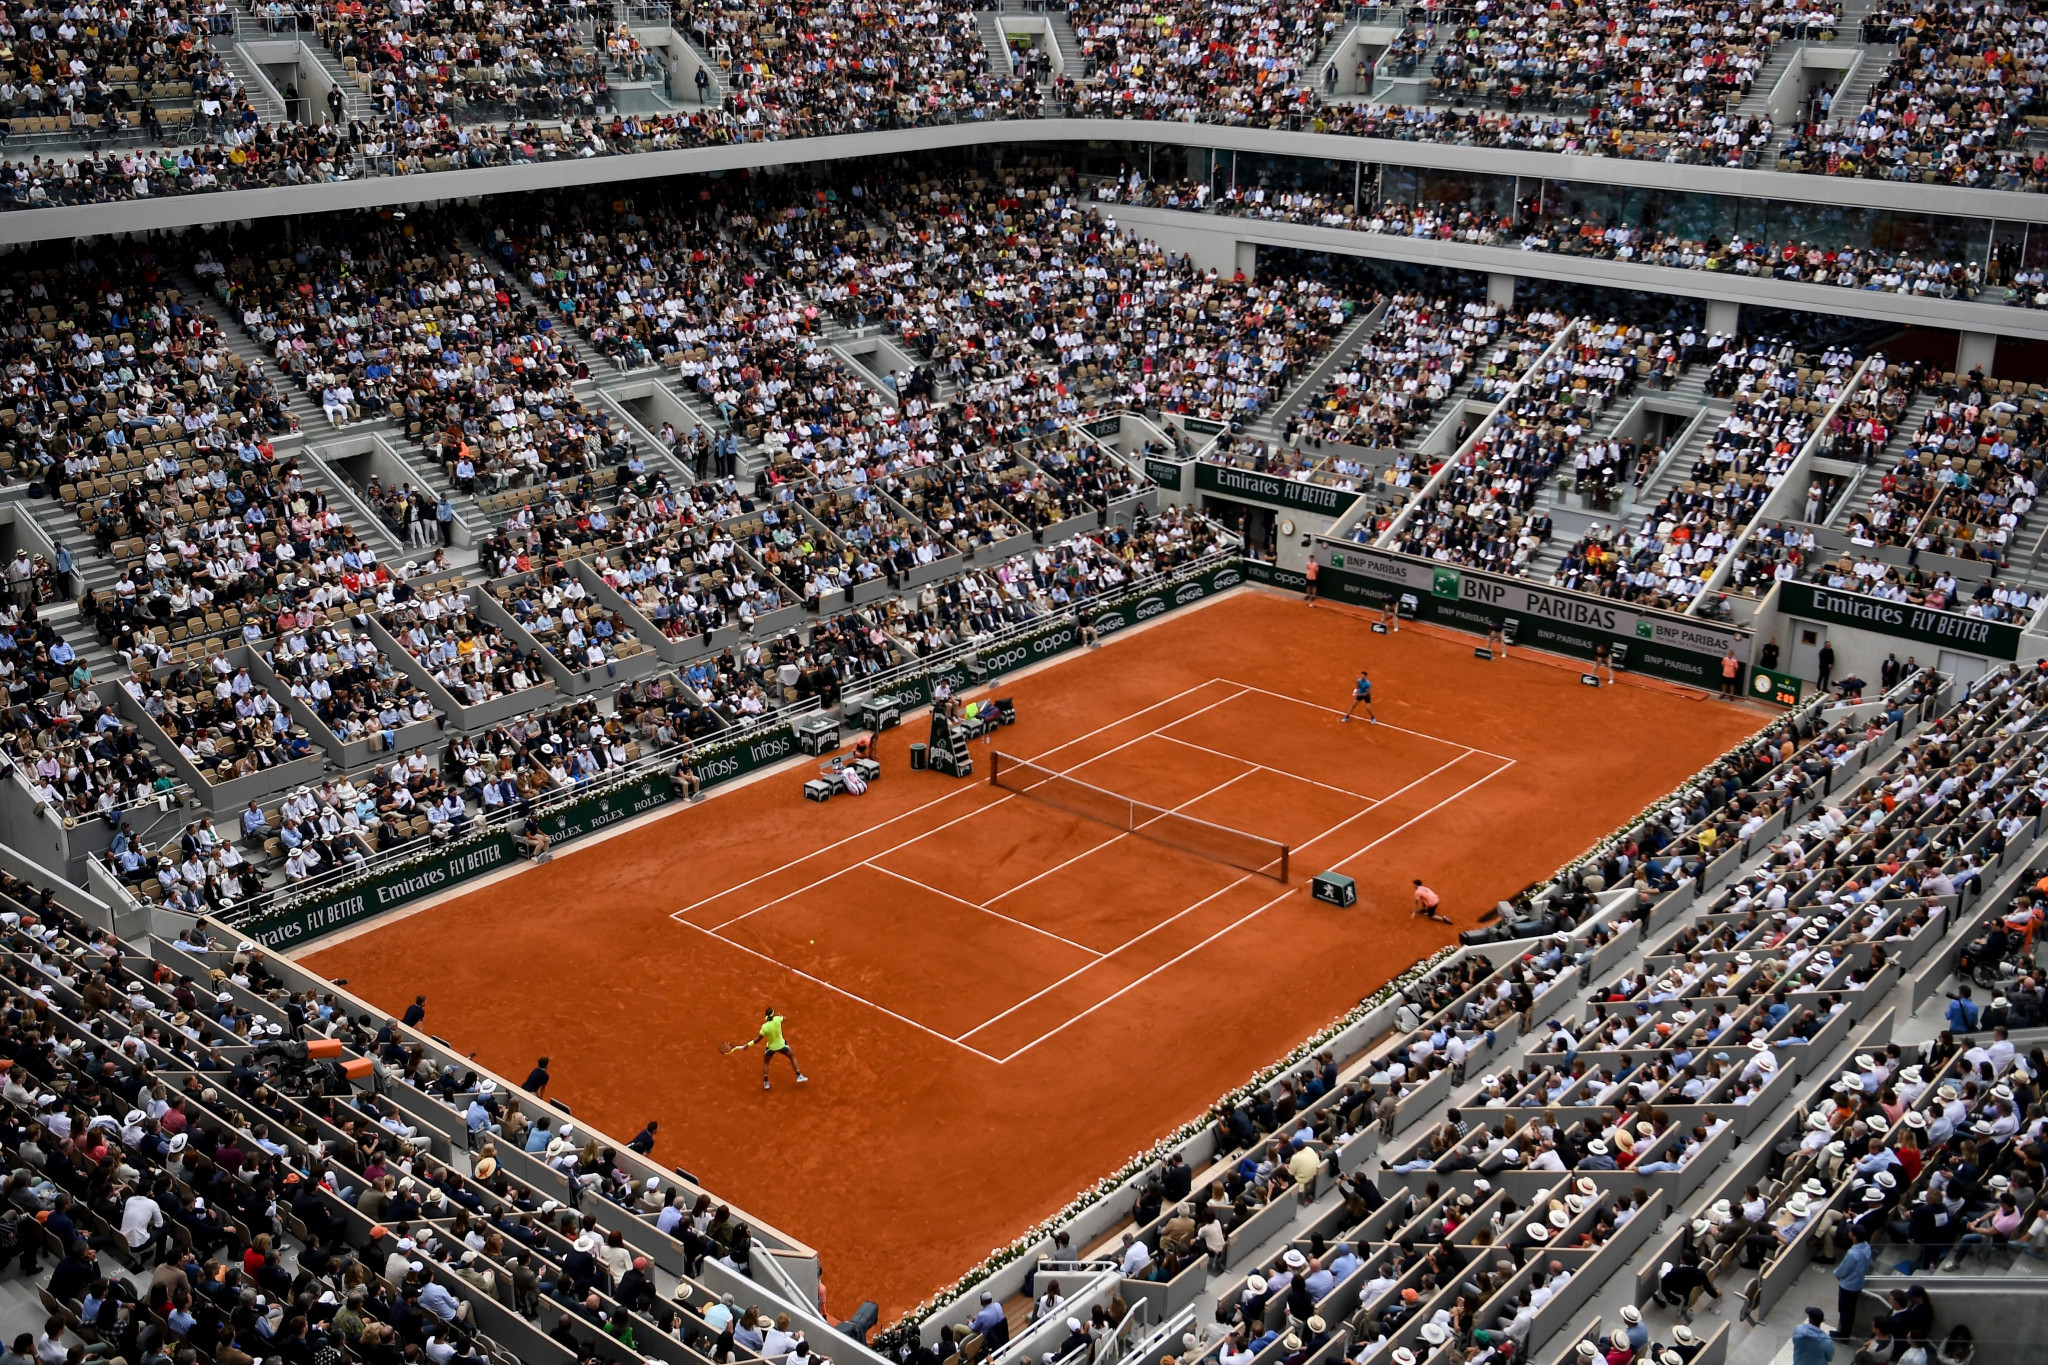 Court Philippe Chatrier was at full capacity to see Spaniard Nadal clinch a 12th French Open title ©Getty Images